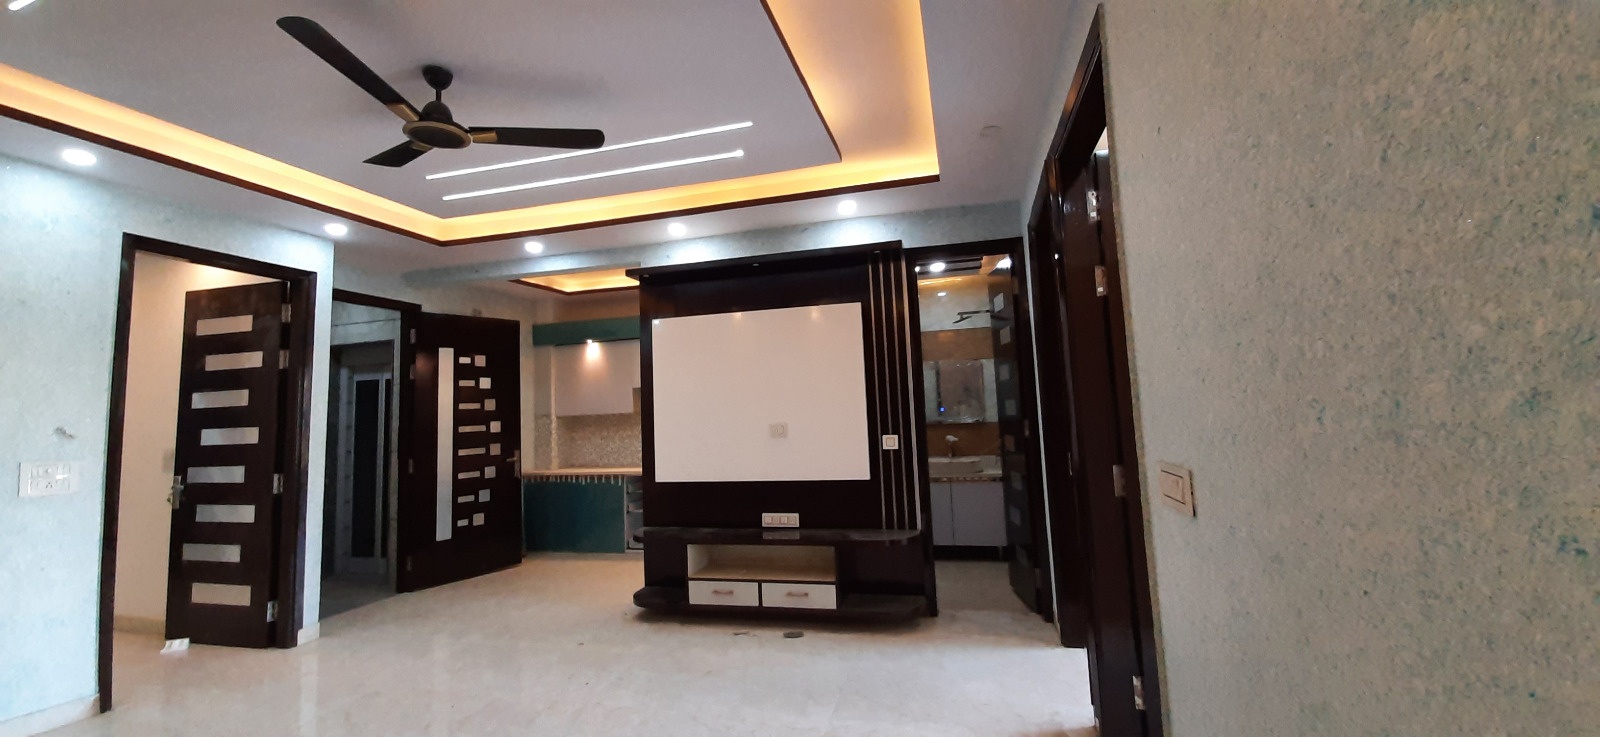 3 Bed/ 4 Bath Sell Apartment/ Flat; 2,025 sq. ft. carpet area; Ready To Move for sale @Gurgaon sector 102